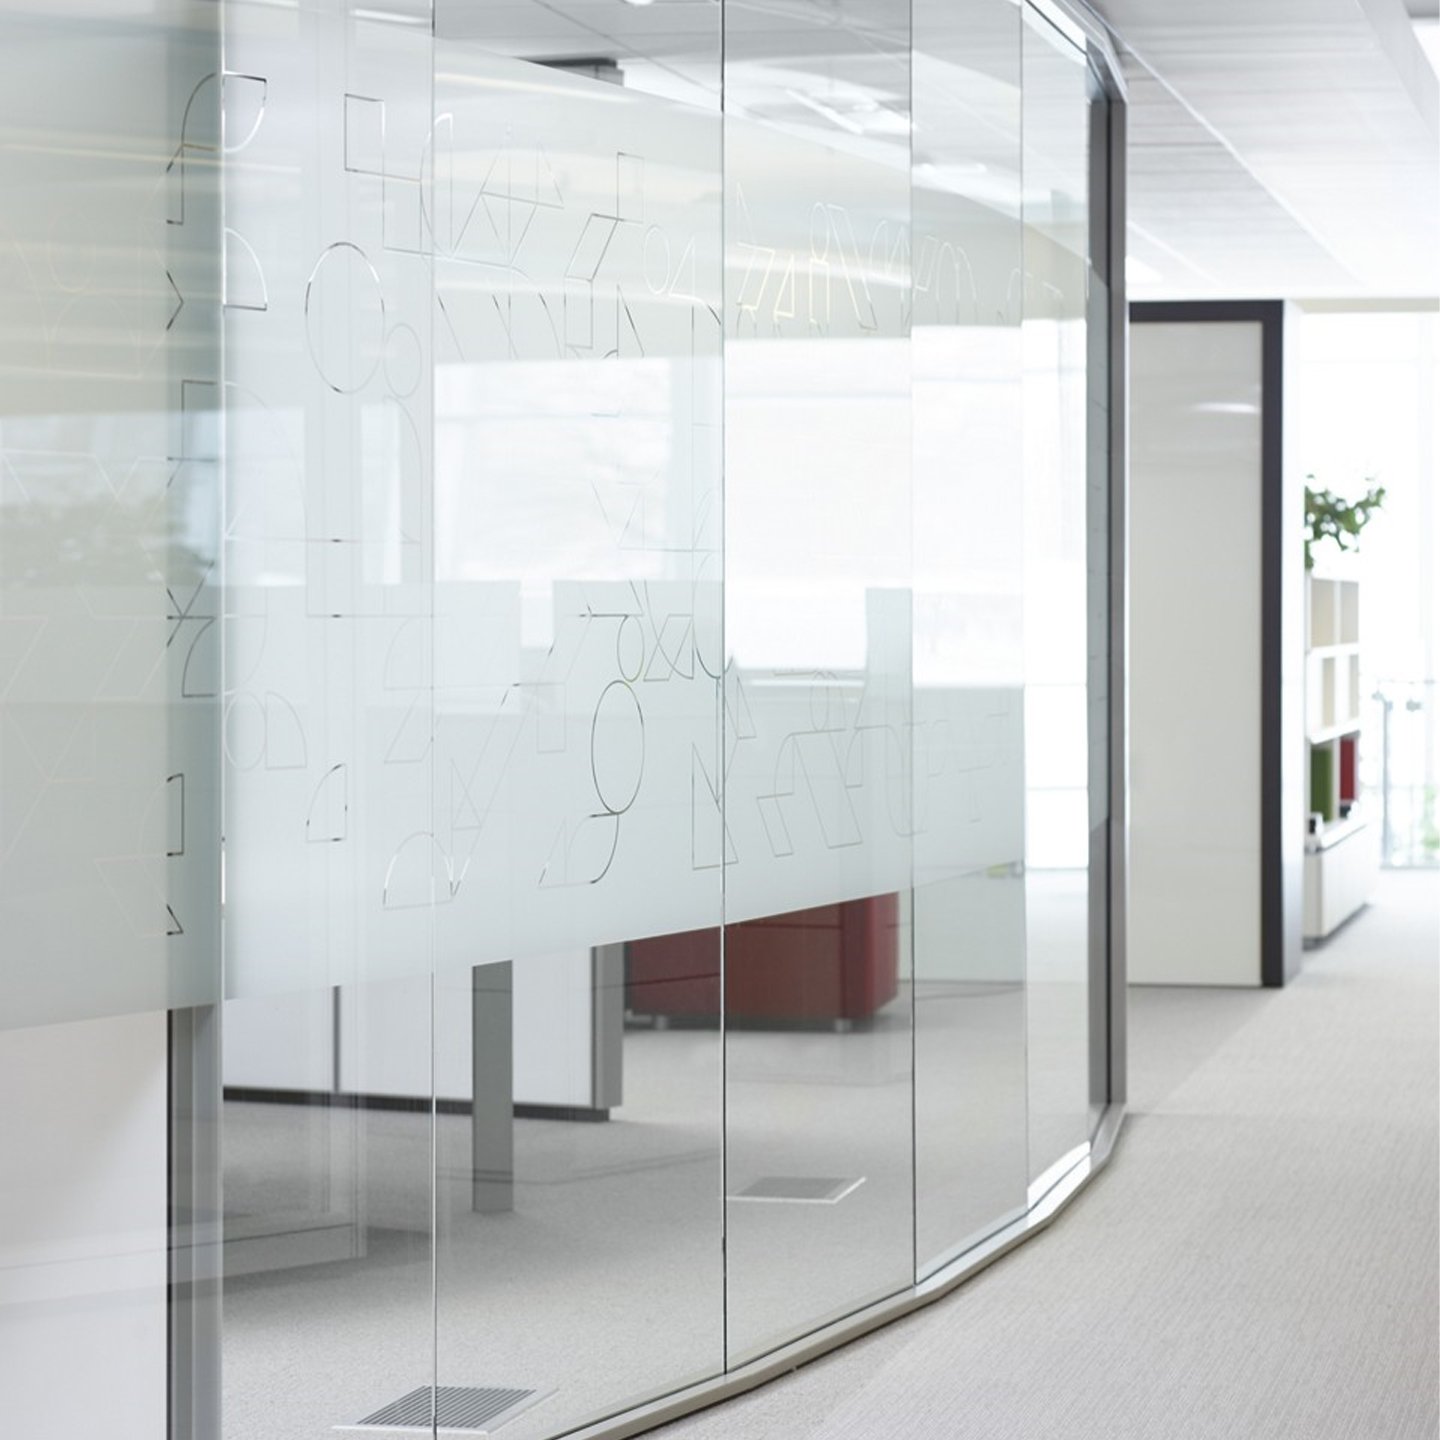 Haworth Enclose Frameless Glass Wall in office walk space for privacy